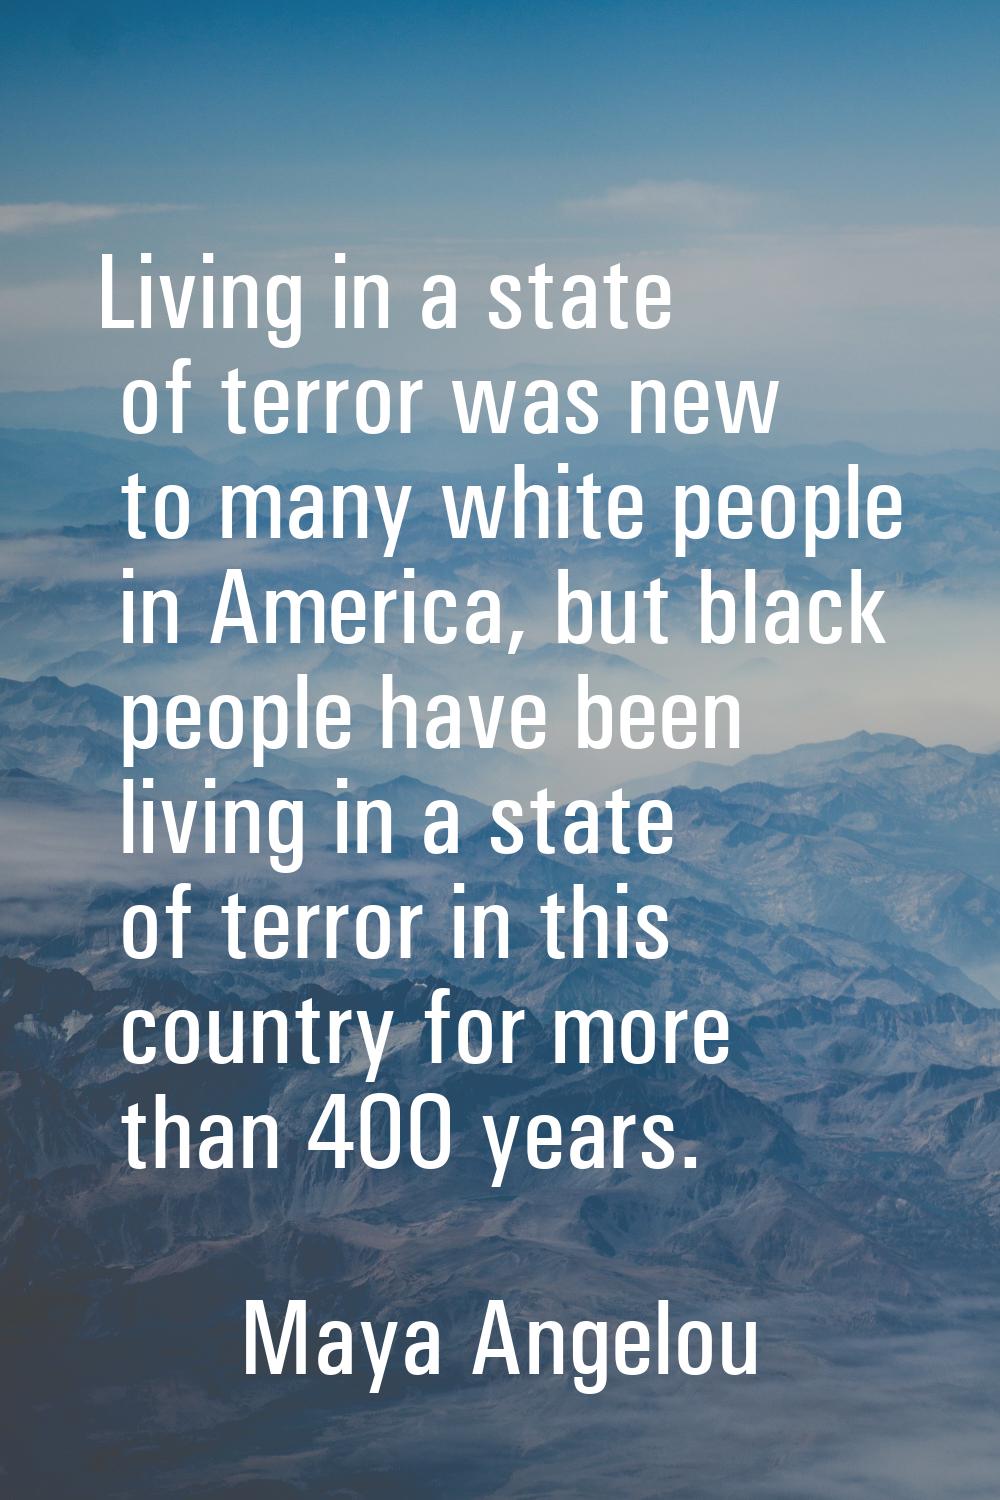 Living in a state of terror was new to many white people in America, but black people have been liv